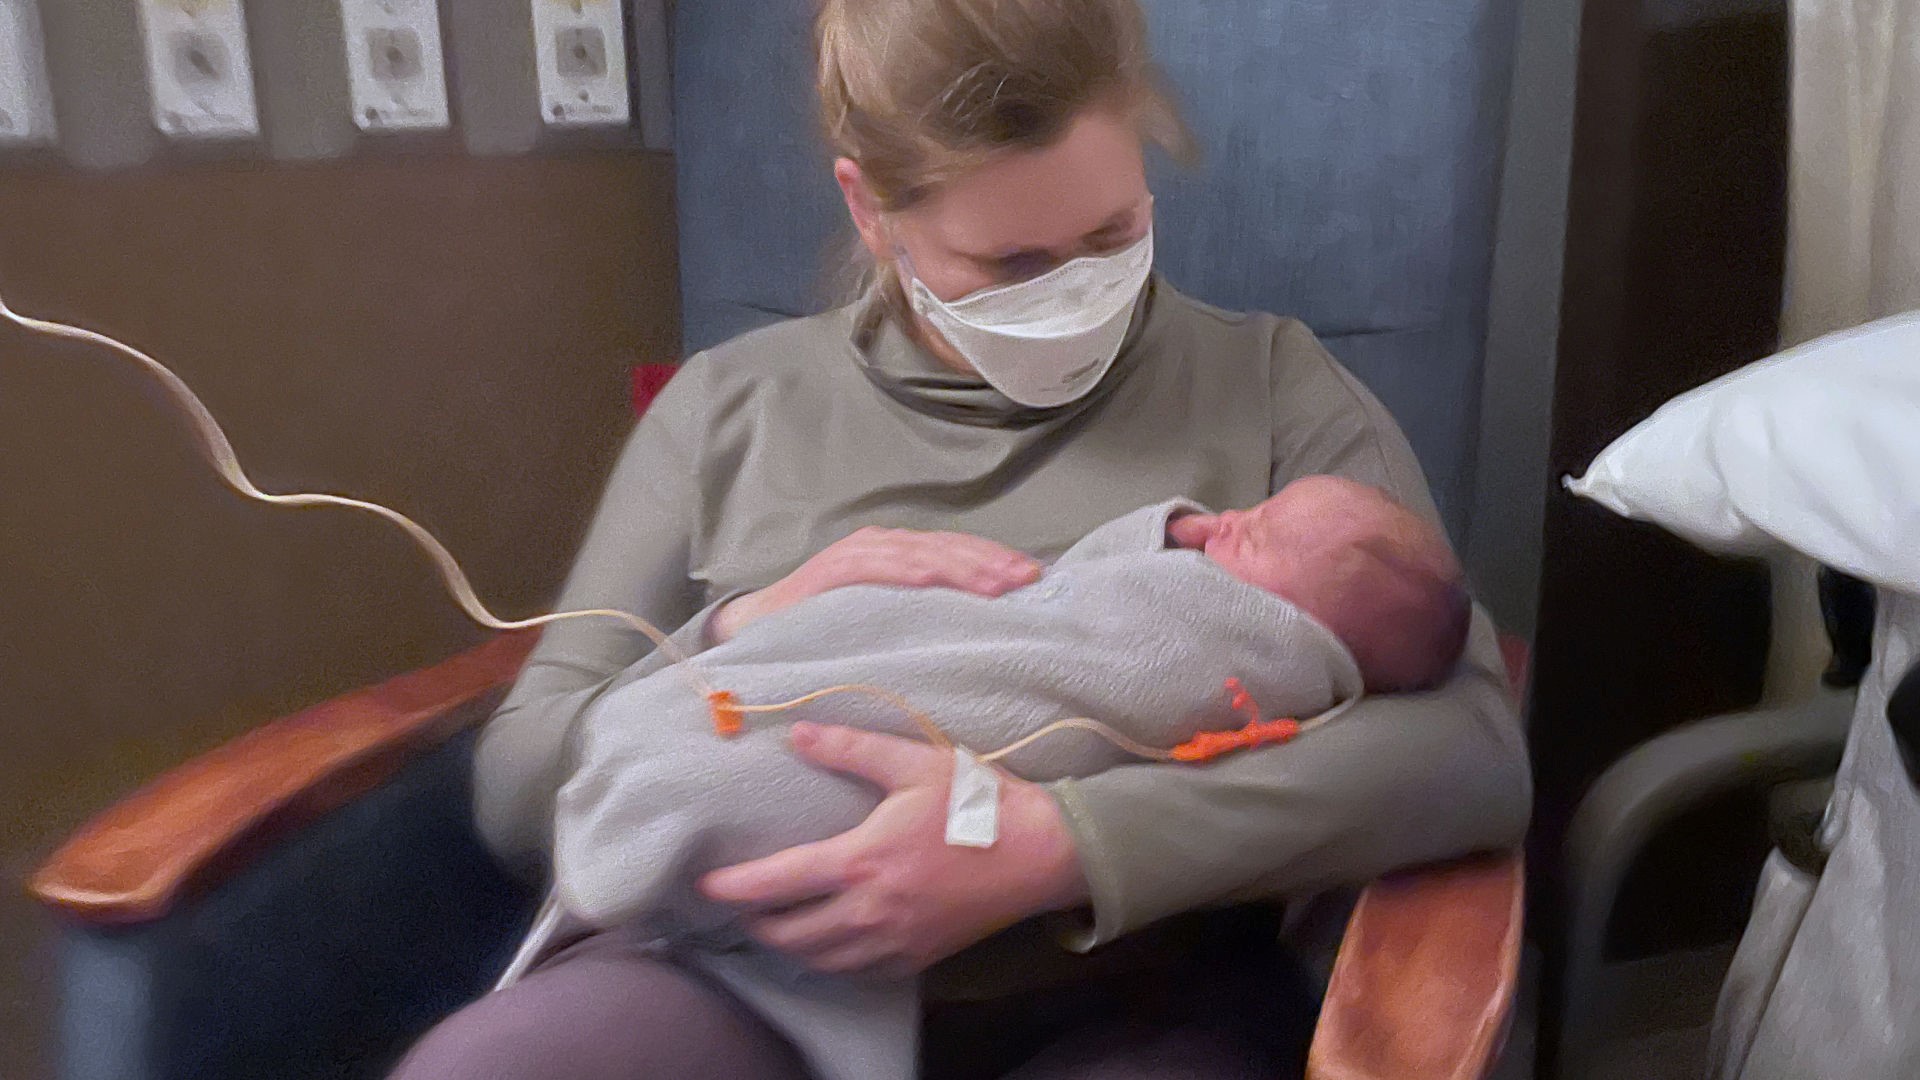 Amanda Grennell holds her newborn son in the hospital, May 2022. Like many breastfeeding parents, she would later experience mastitis.